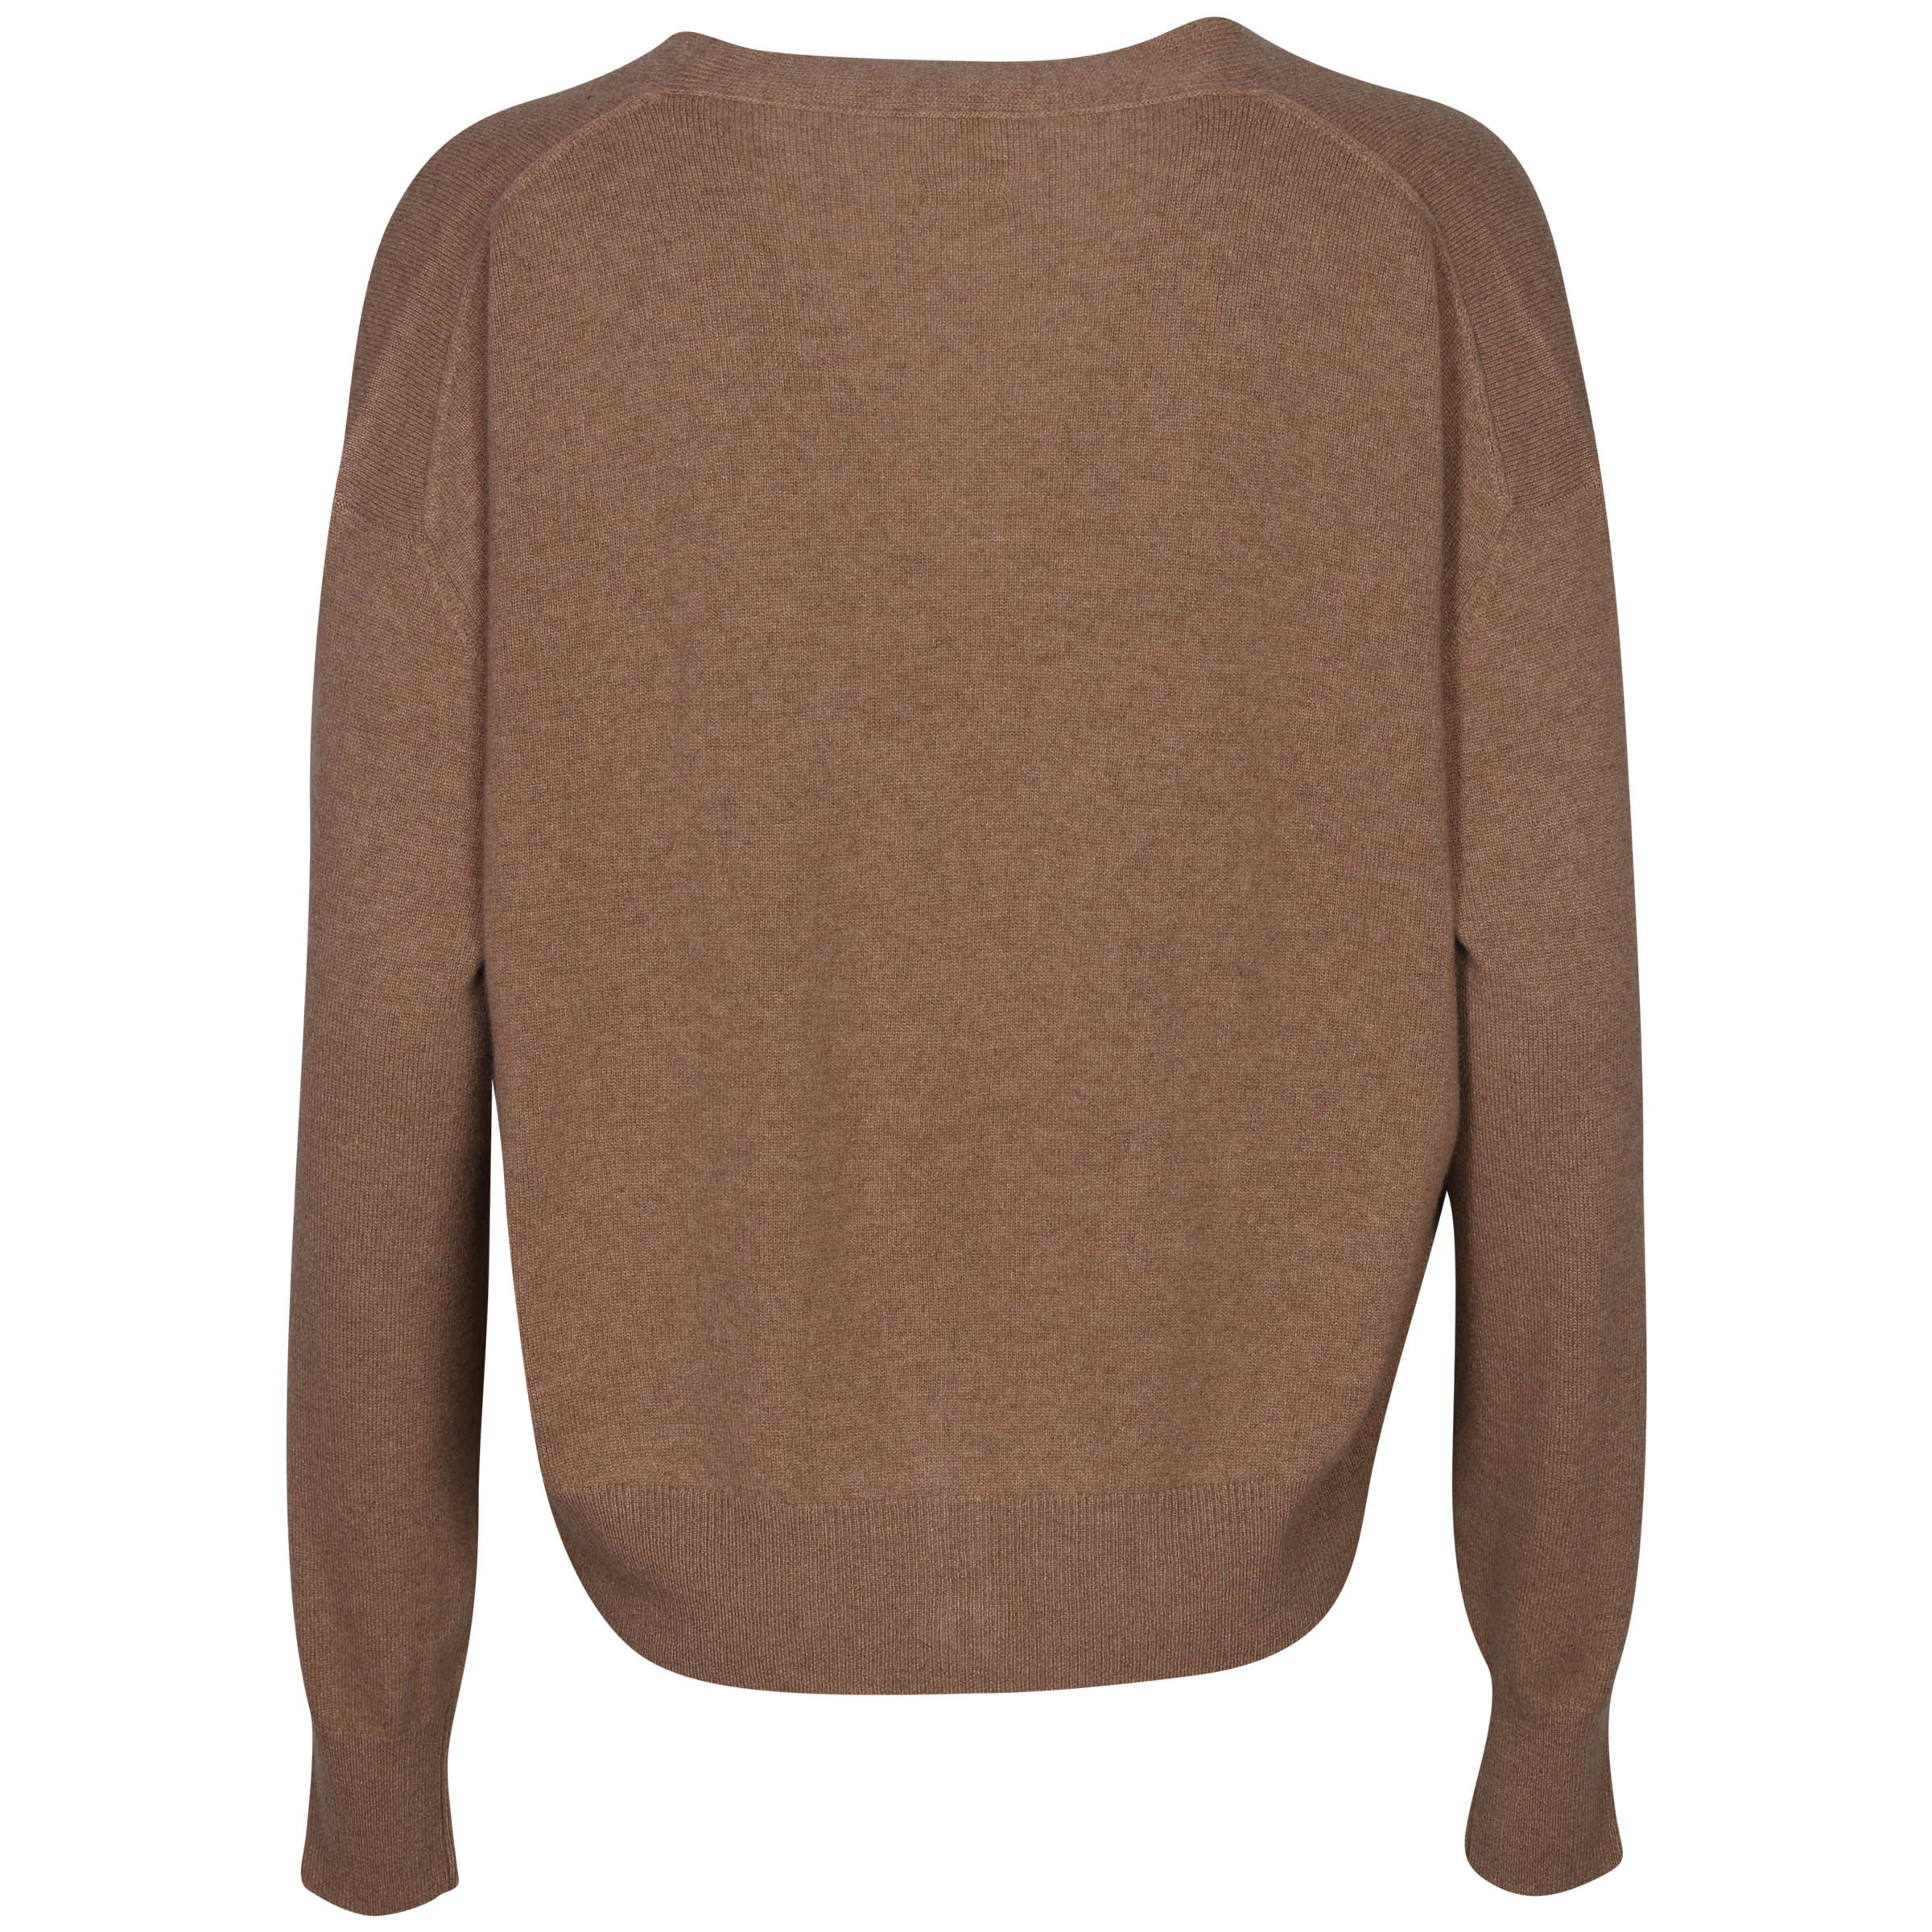 Phiili Recycled Cashmere Cardigan in Camel S/M